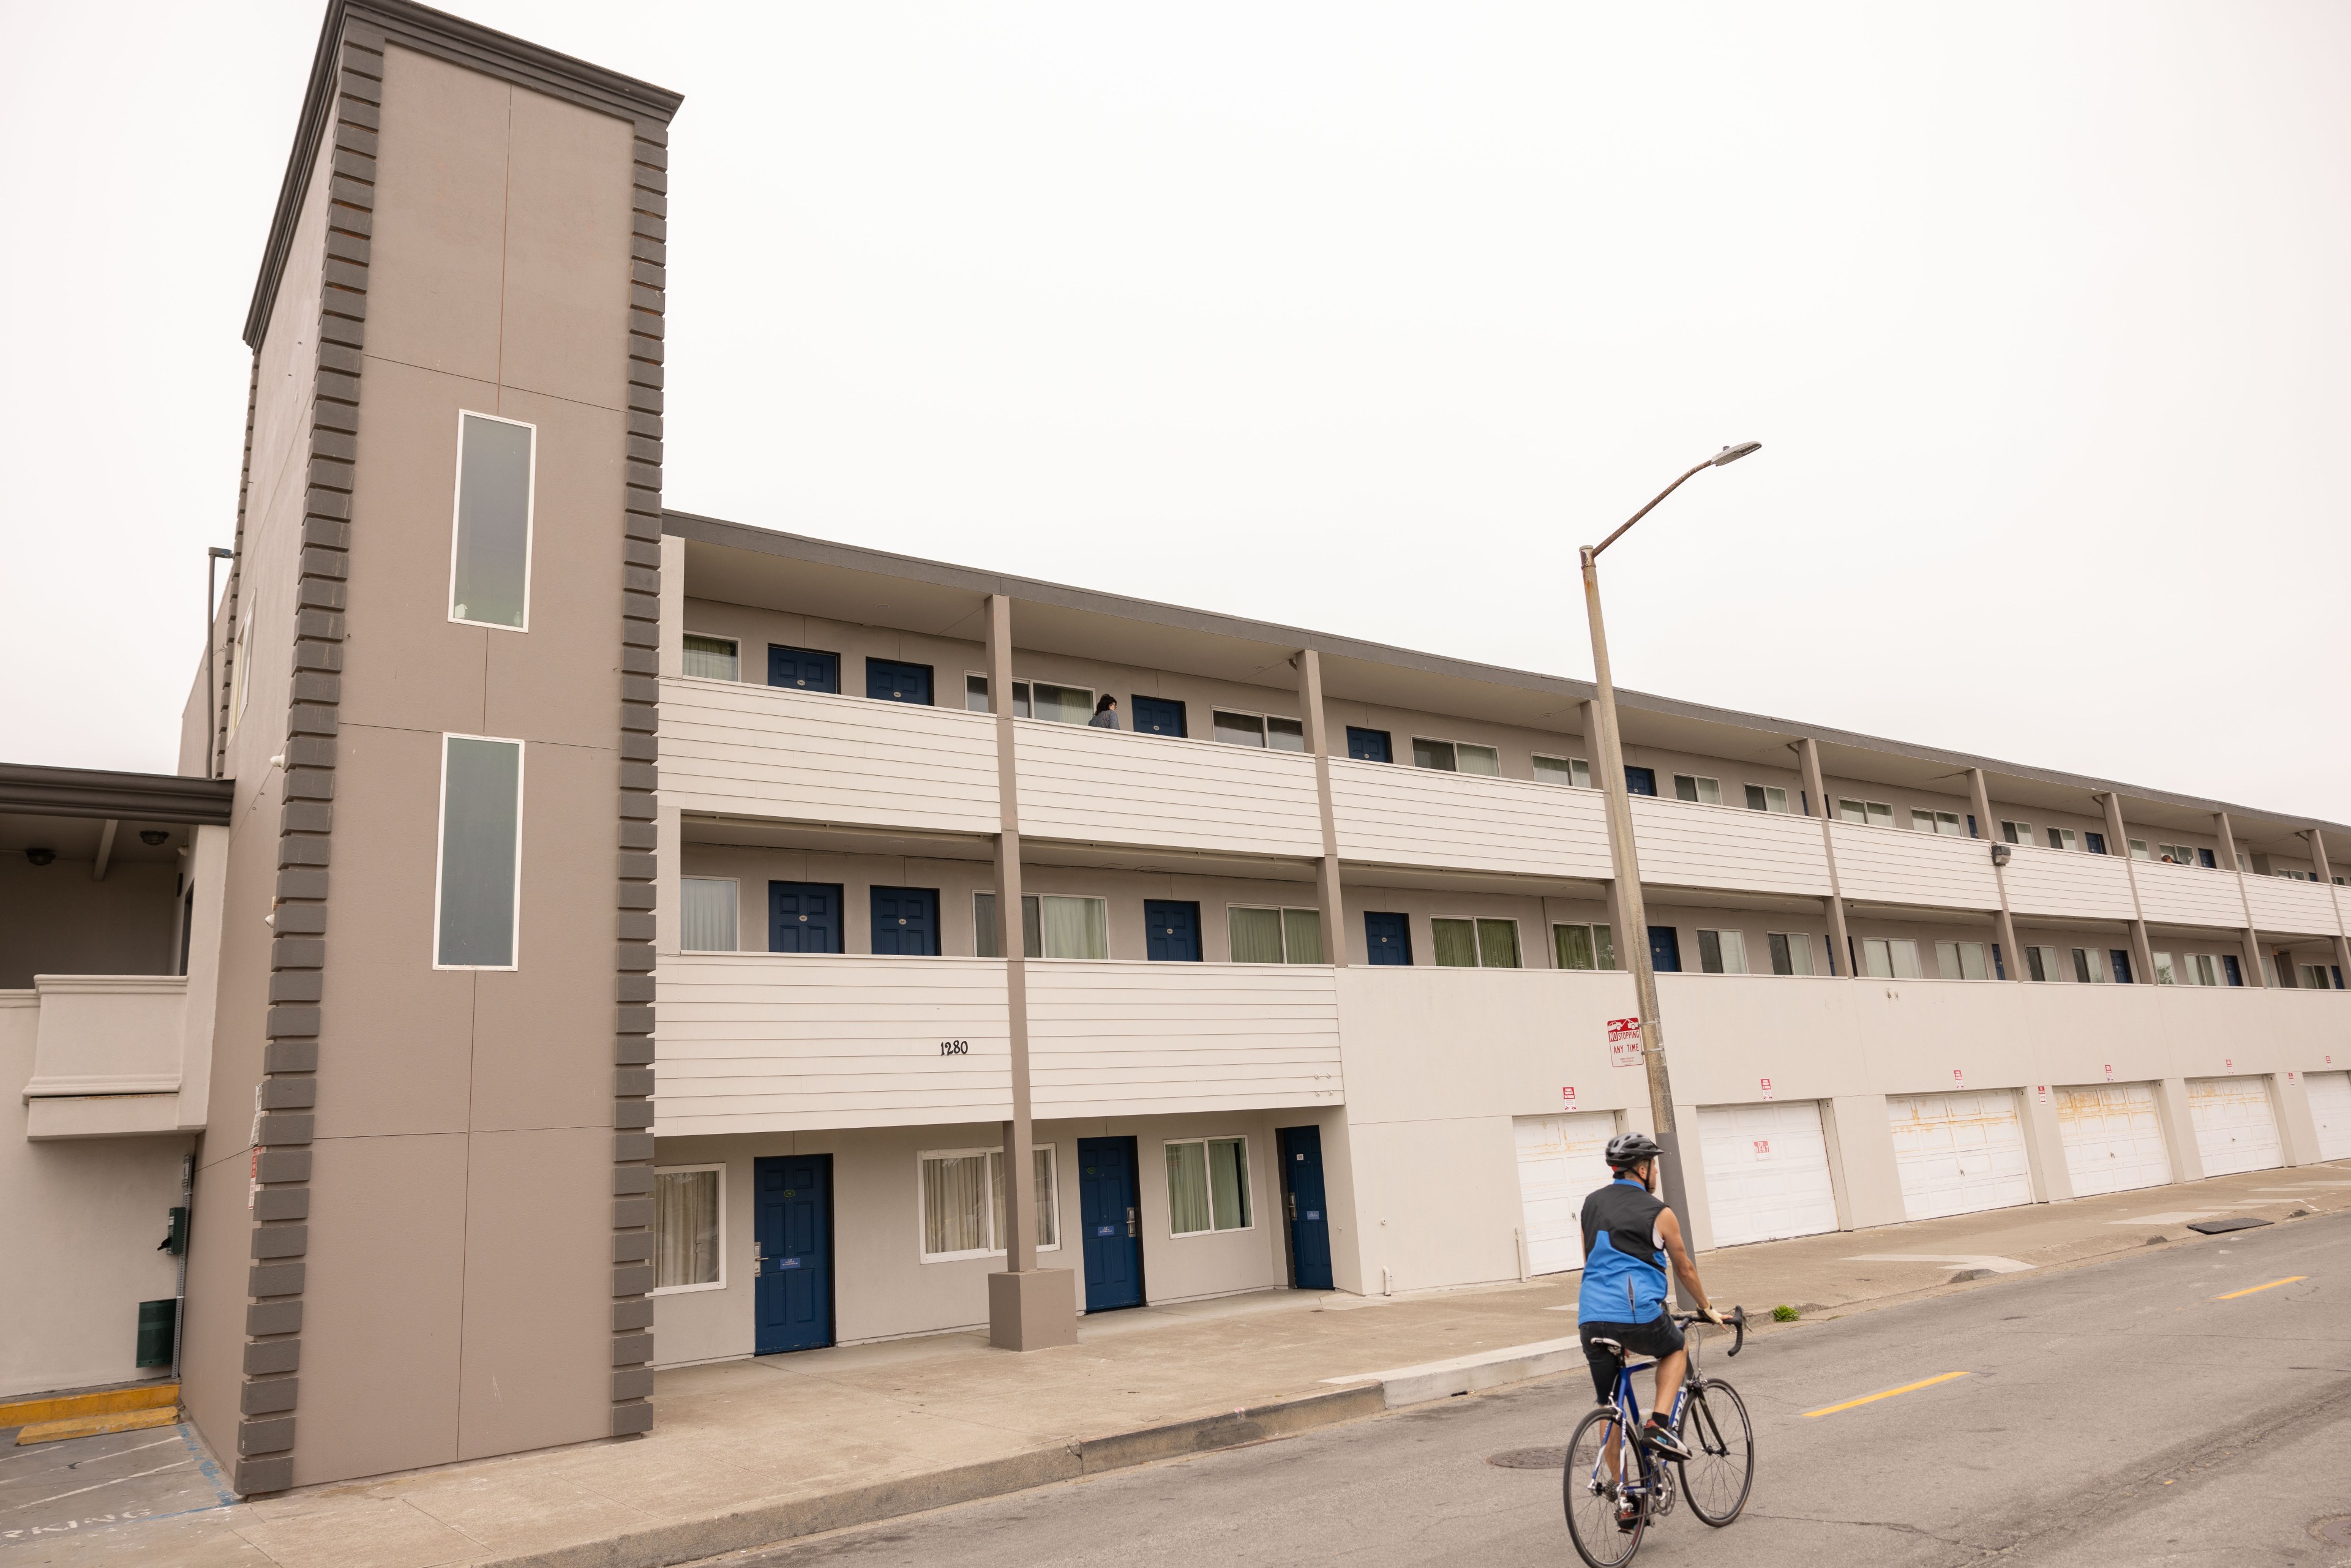 A person on a bicycle rides past a three-story apartment building with gray and white facade, blue doors, and a vertical section with narrow windows.